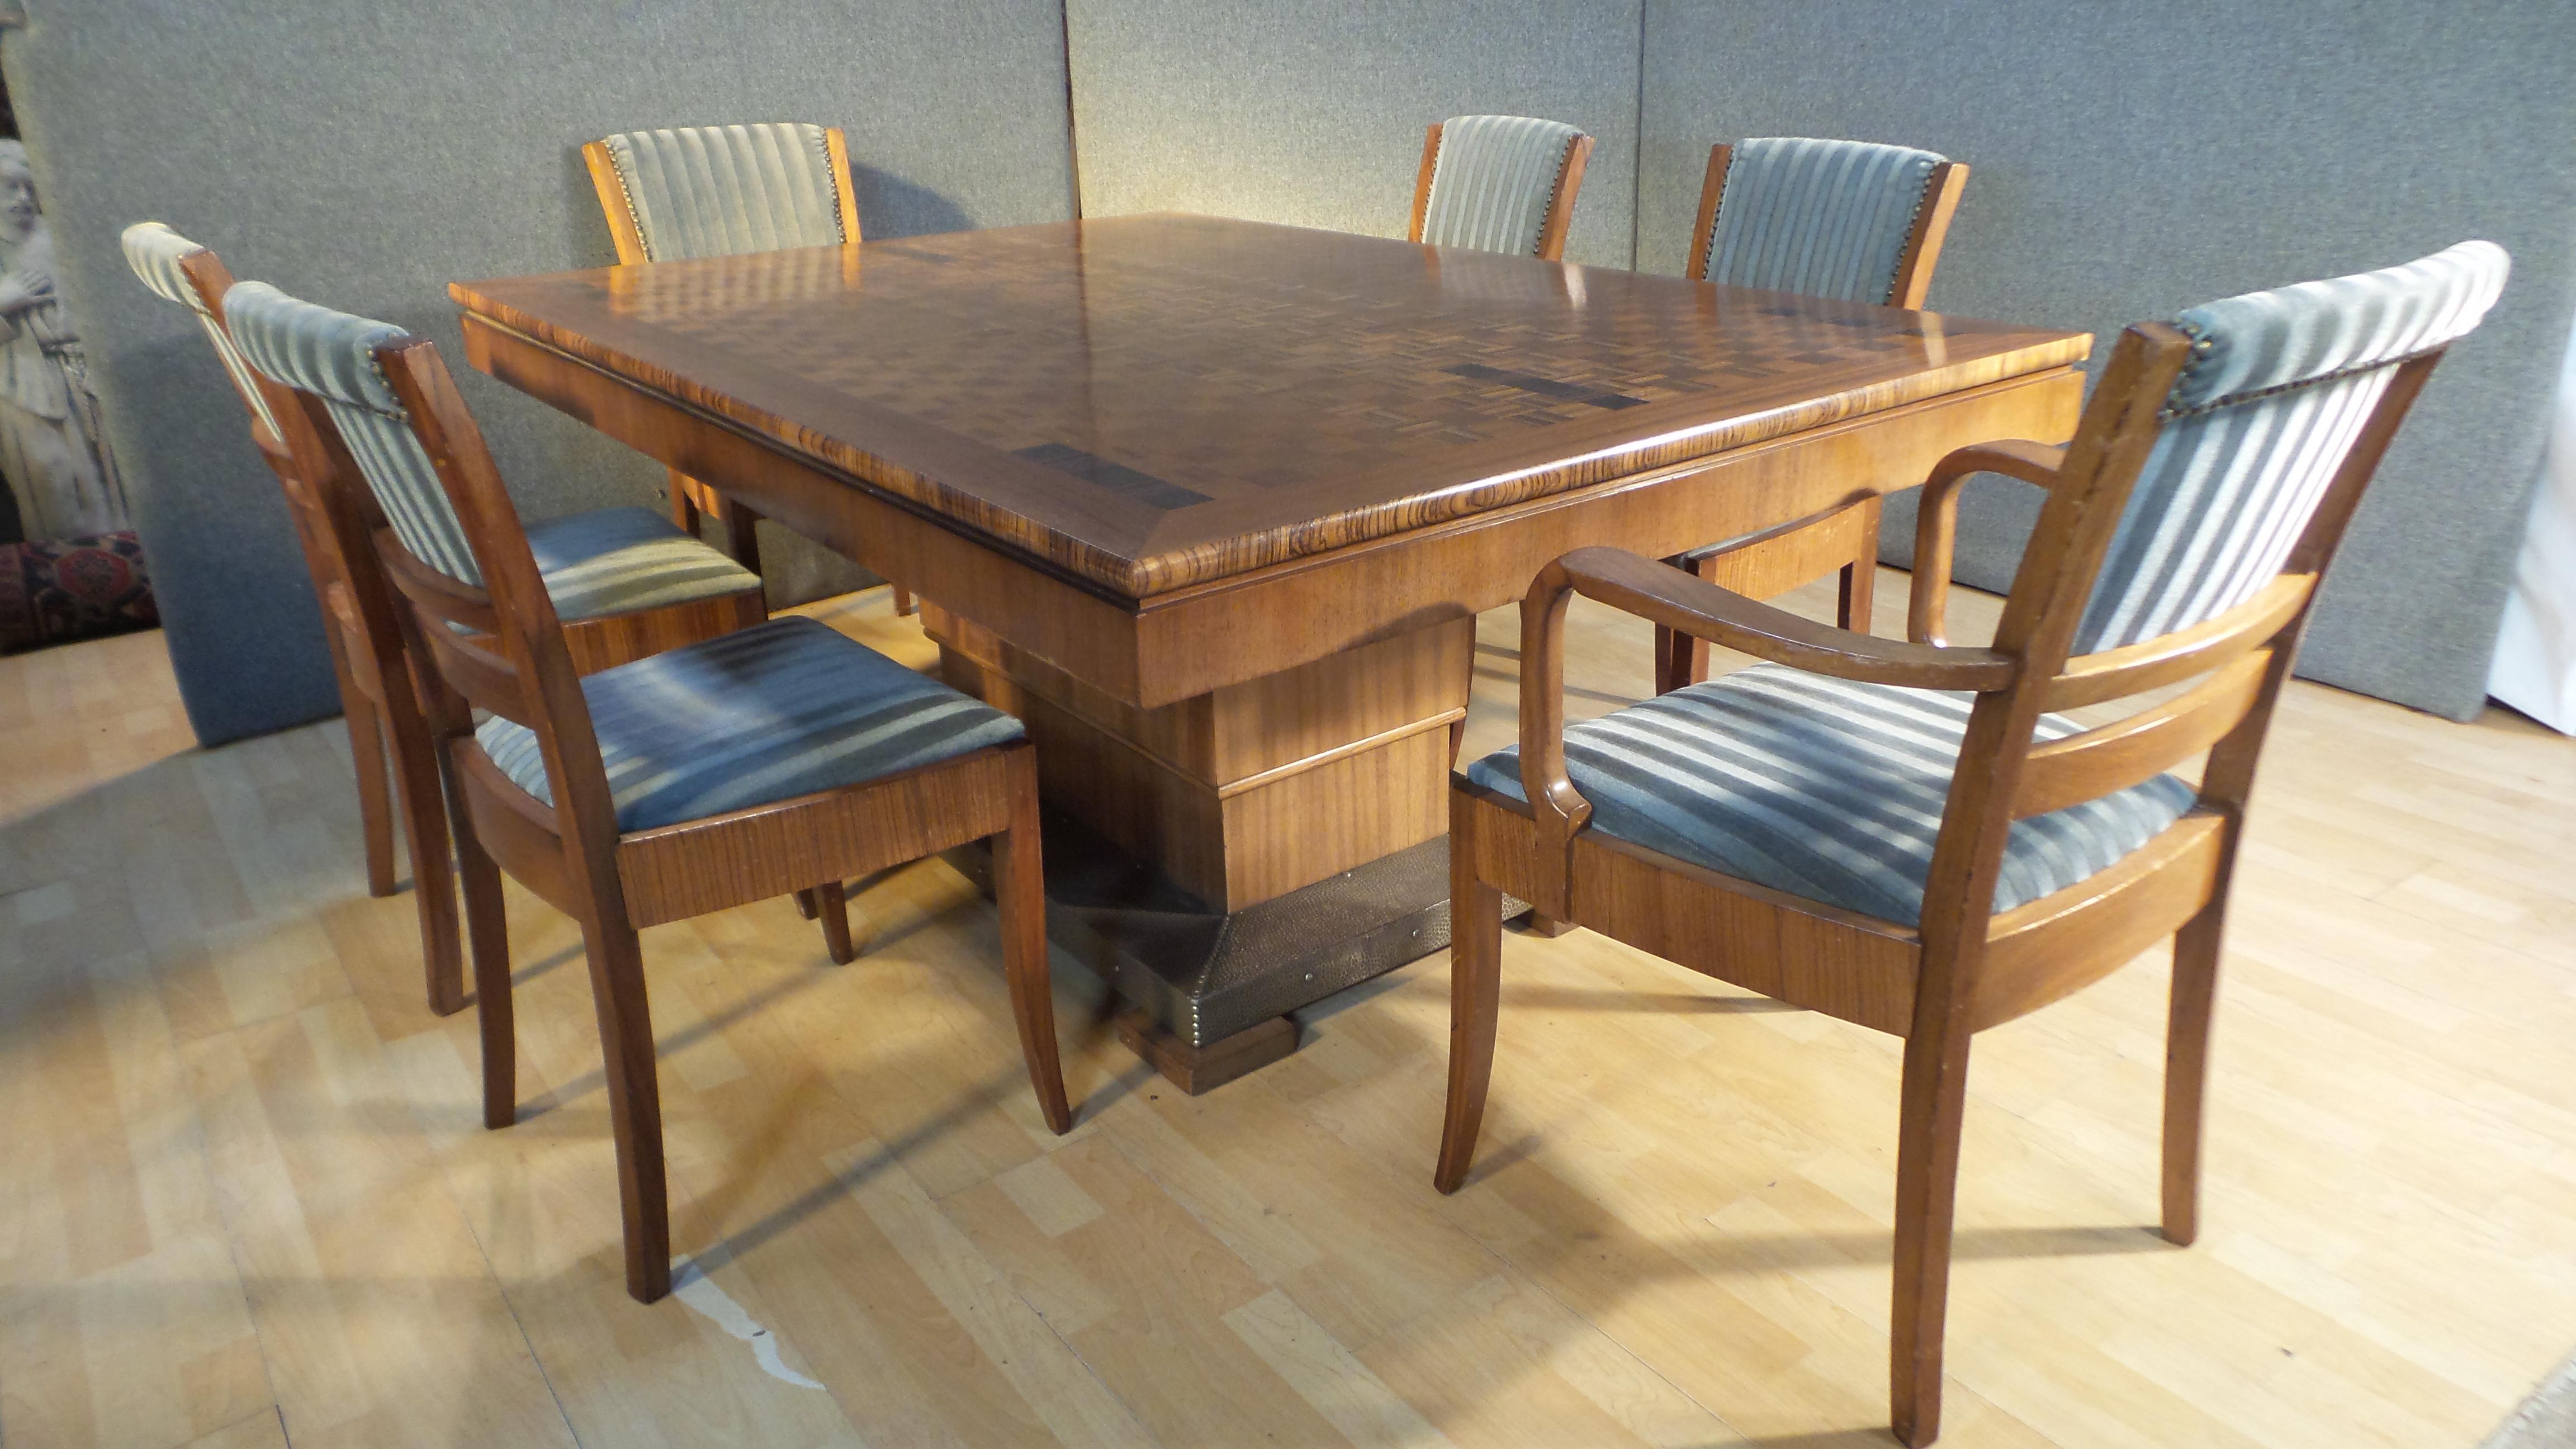 An outstanding Art Deco table of excellent quality dating from circa 1930 

purchased from a family in Belgium who recalls it was designed by De Coene

The table has the most exceptional and iconic base with an inverted stepped base to a